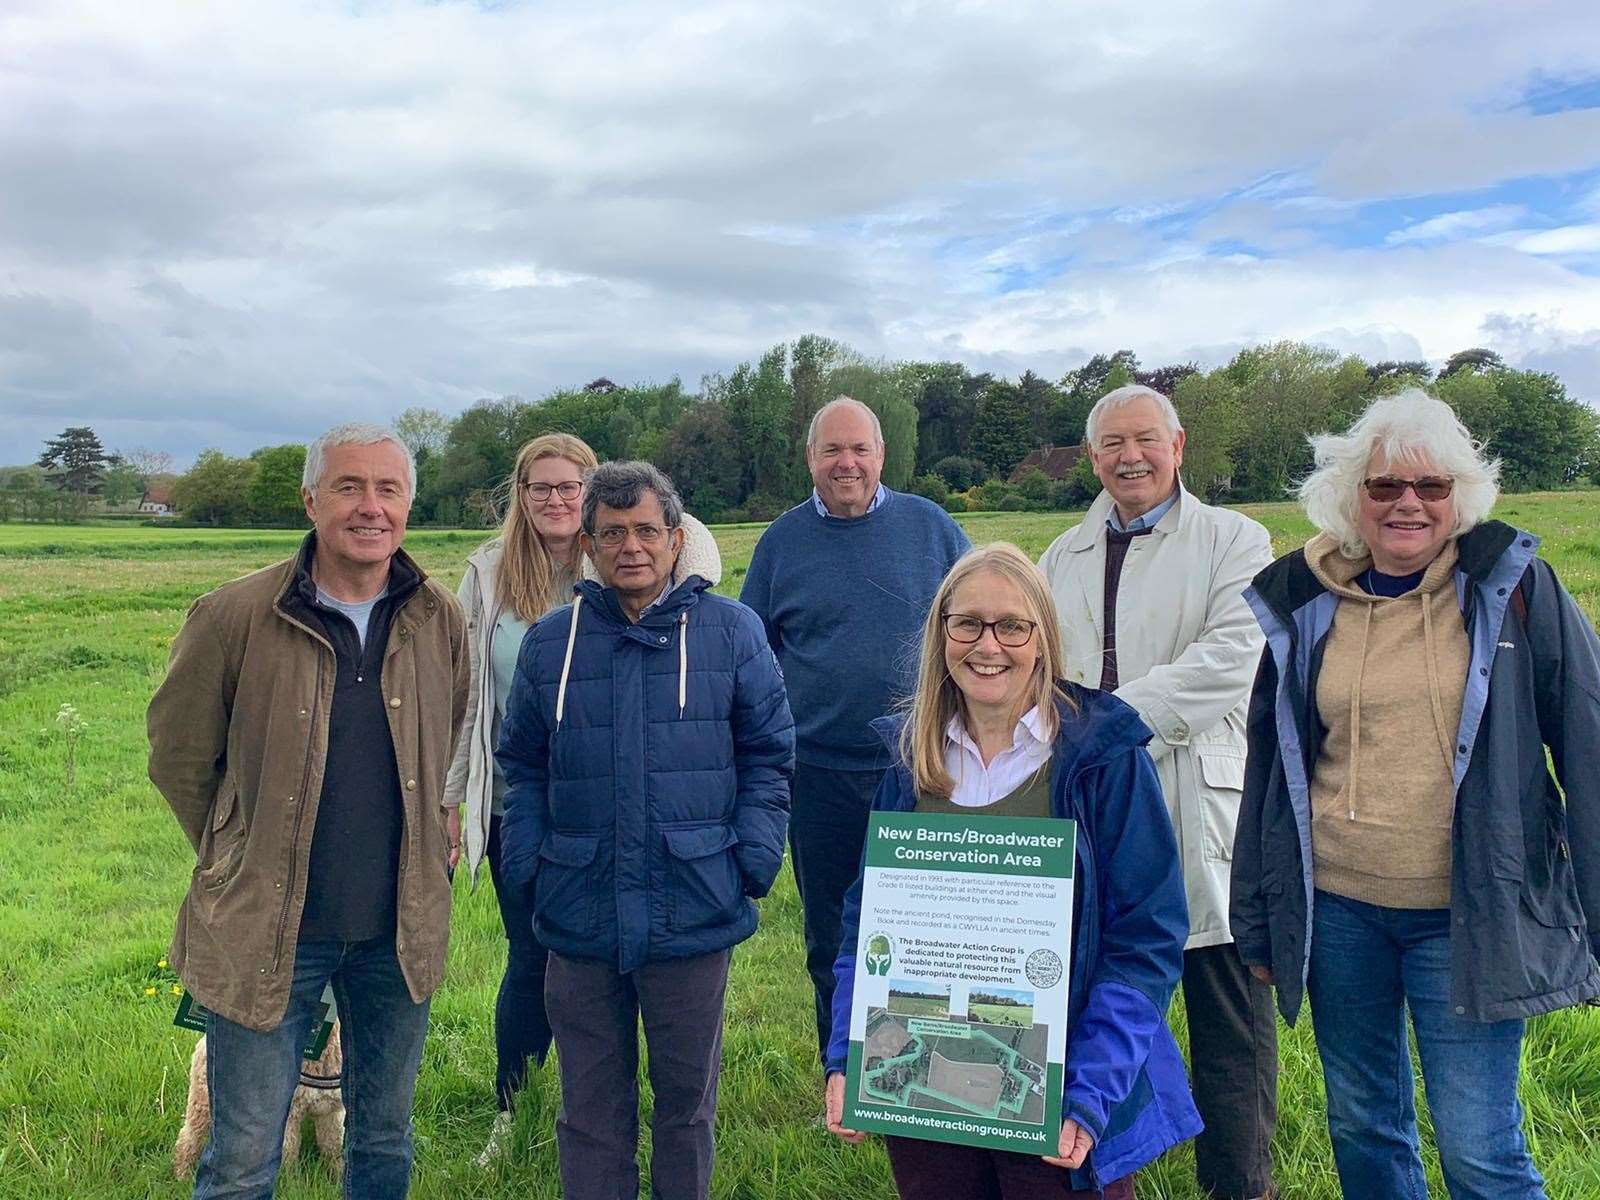 The Broadwater Action Group's committee members: from left, Simon Thomas, Sarah Arnold, Prof. Bim Bhaduri, Tony Ward, Becky Robinson Hugill, Richard Brown and Christine Woodger